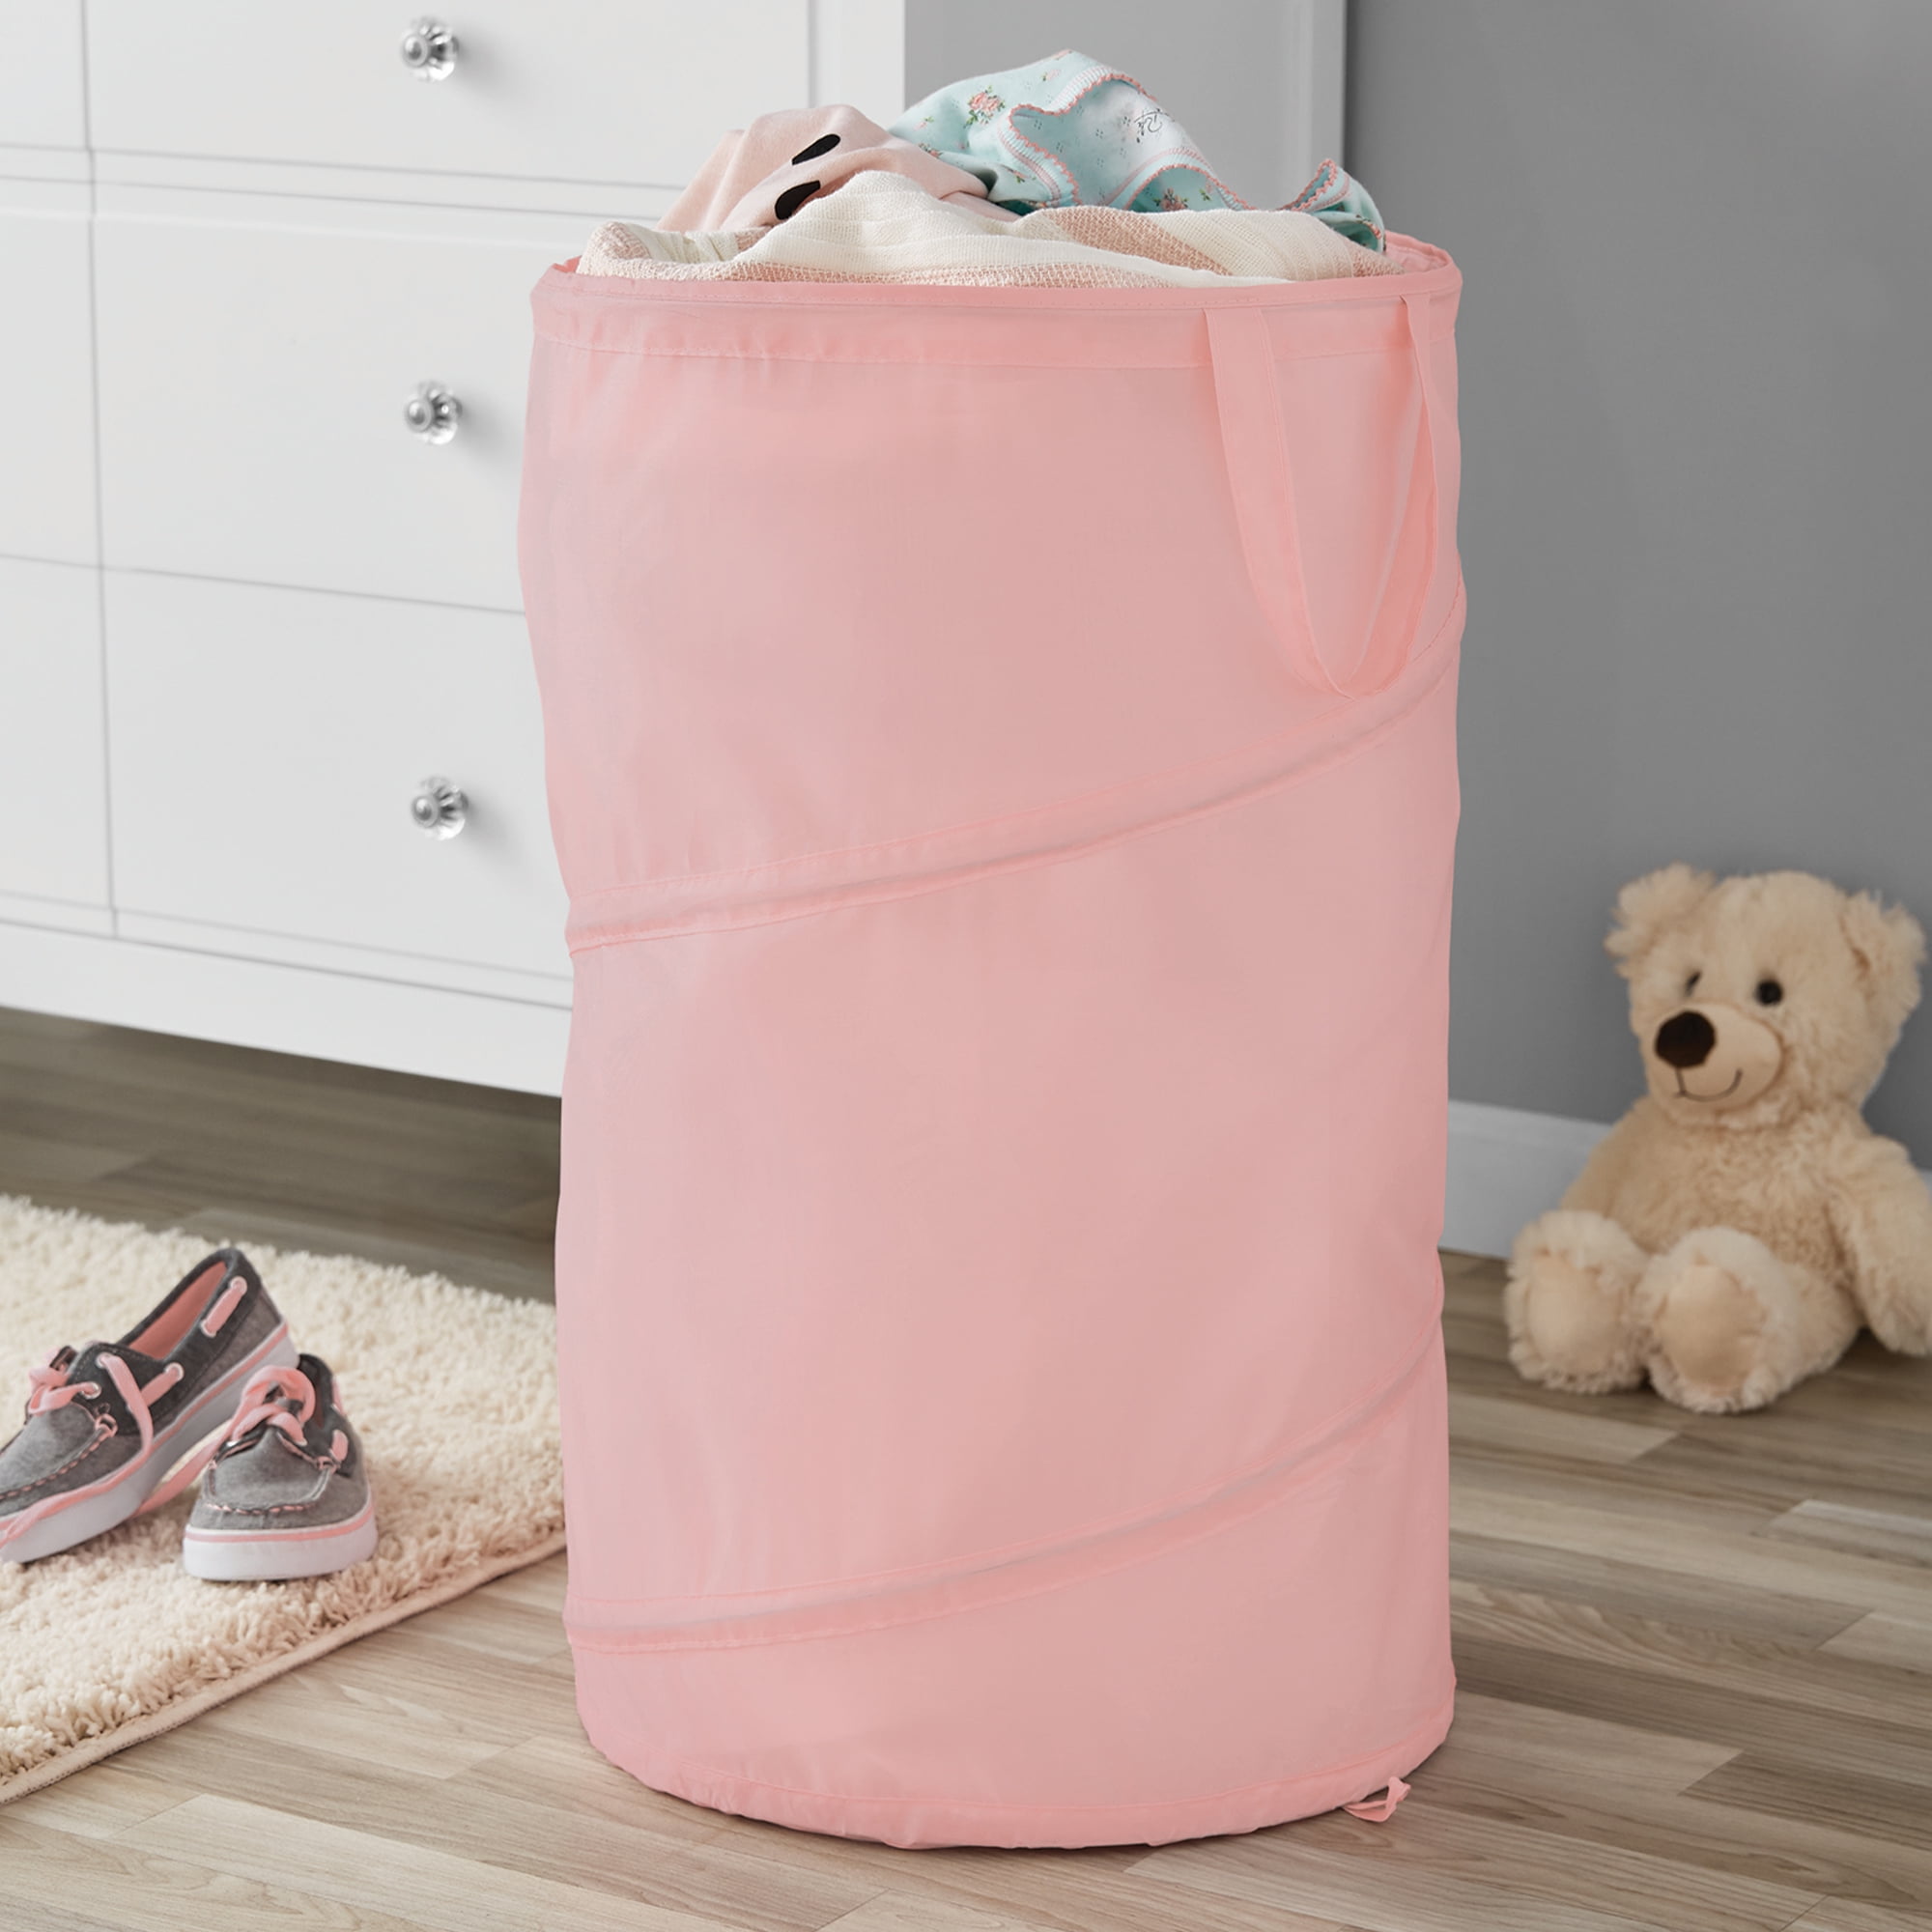 Your Zone Pop-up Polyester Spiral Laundry Hamper, Pink